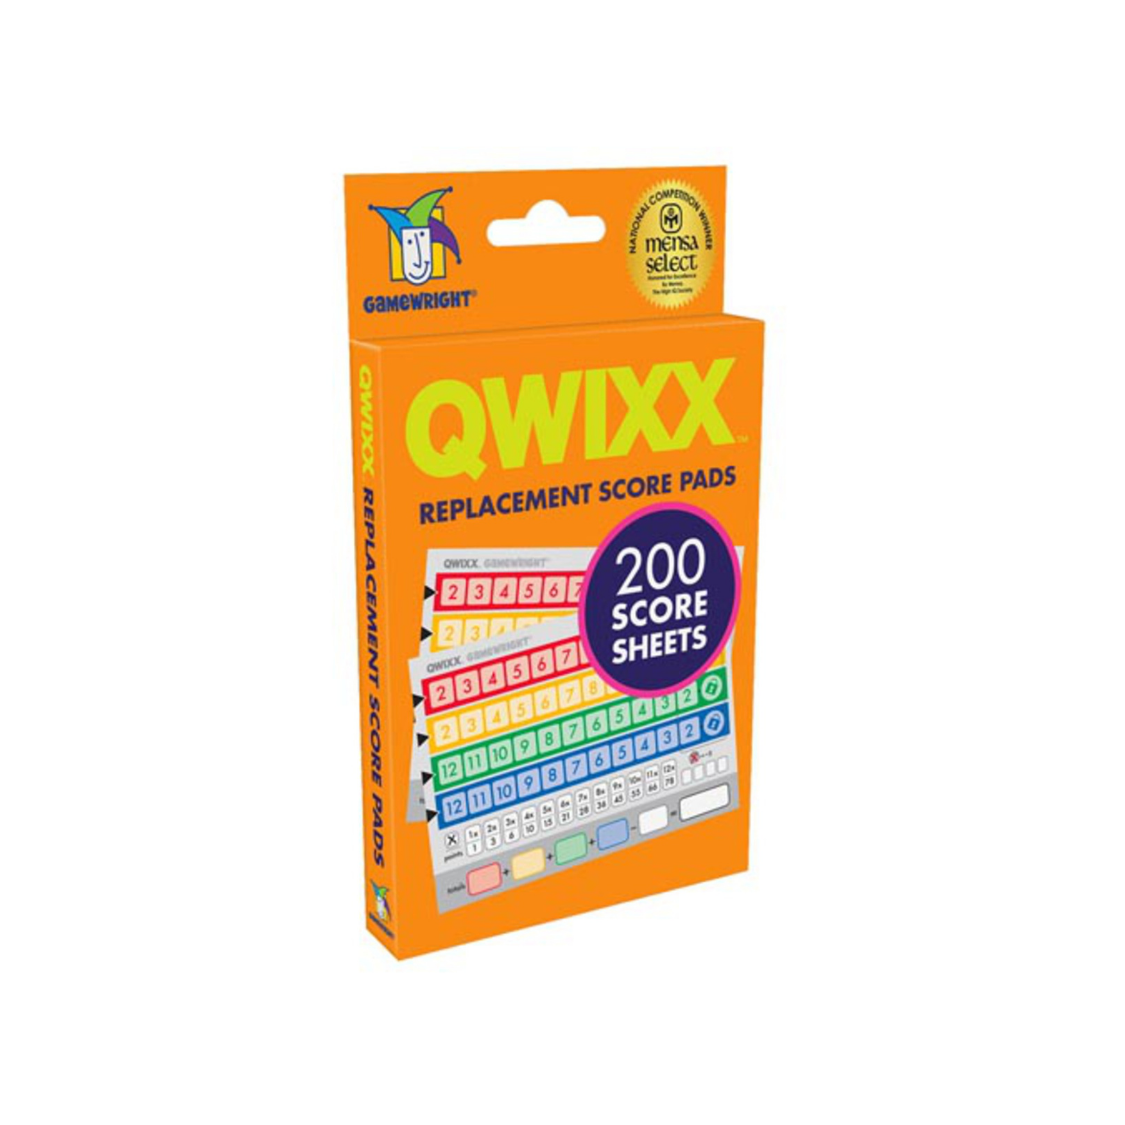 Qwixx Replacement Score Pads